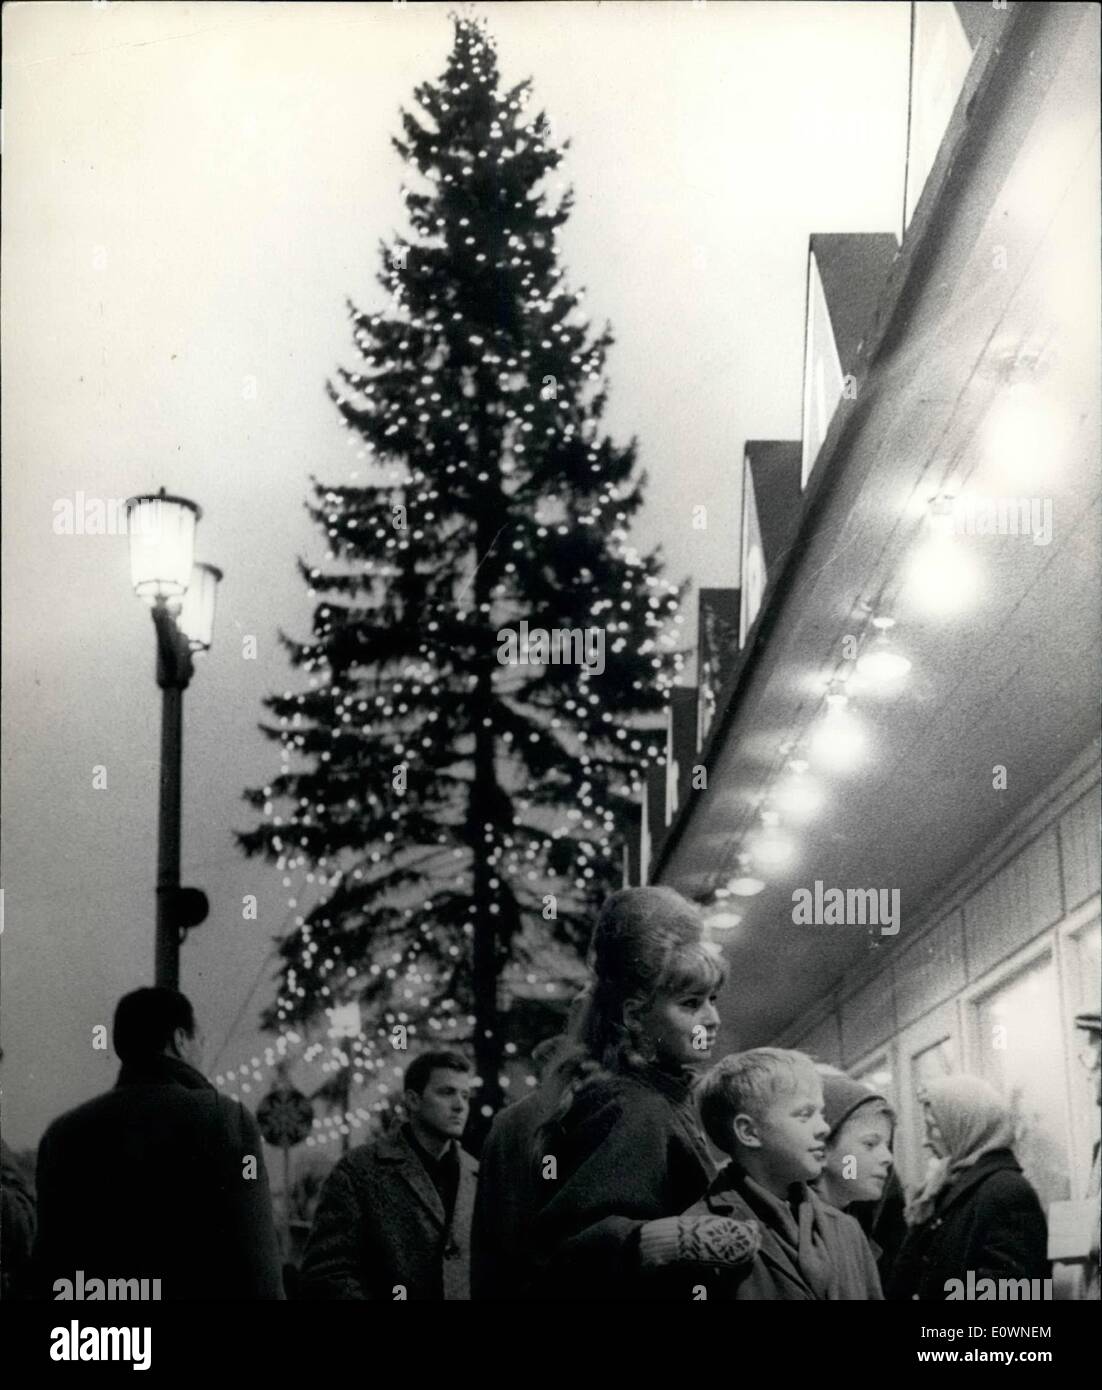 Dec. 12, 1963 - Christmas in Eastberilin : First time sine 1960 Berliner from both parts of the town can have Christmas together in this year. more than hundred thousand the west Berliner can see their relations in Eastberlin in the Christmas days. photo shows A young Westberliner girl with her cousins from east Berlin on the Easterberliner Christmas- market in the frankfurter Allee. Stock Photo